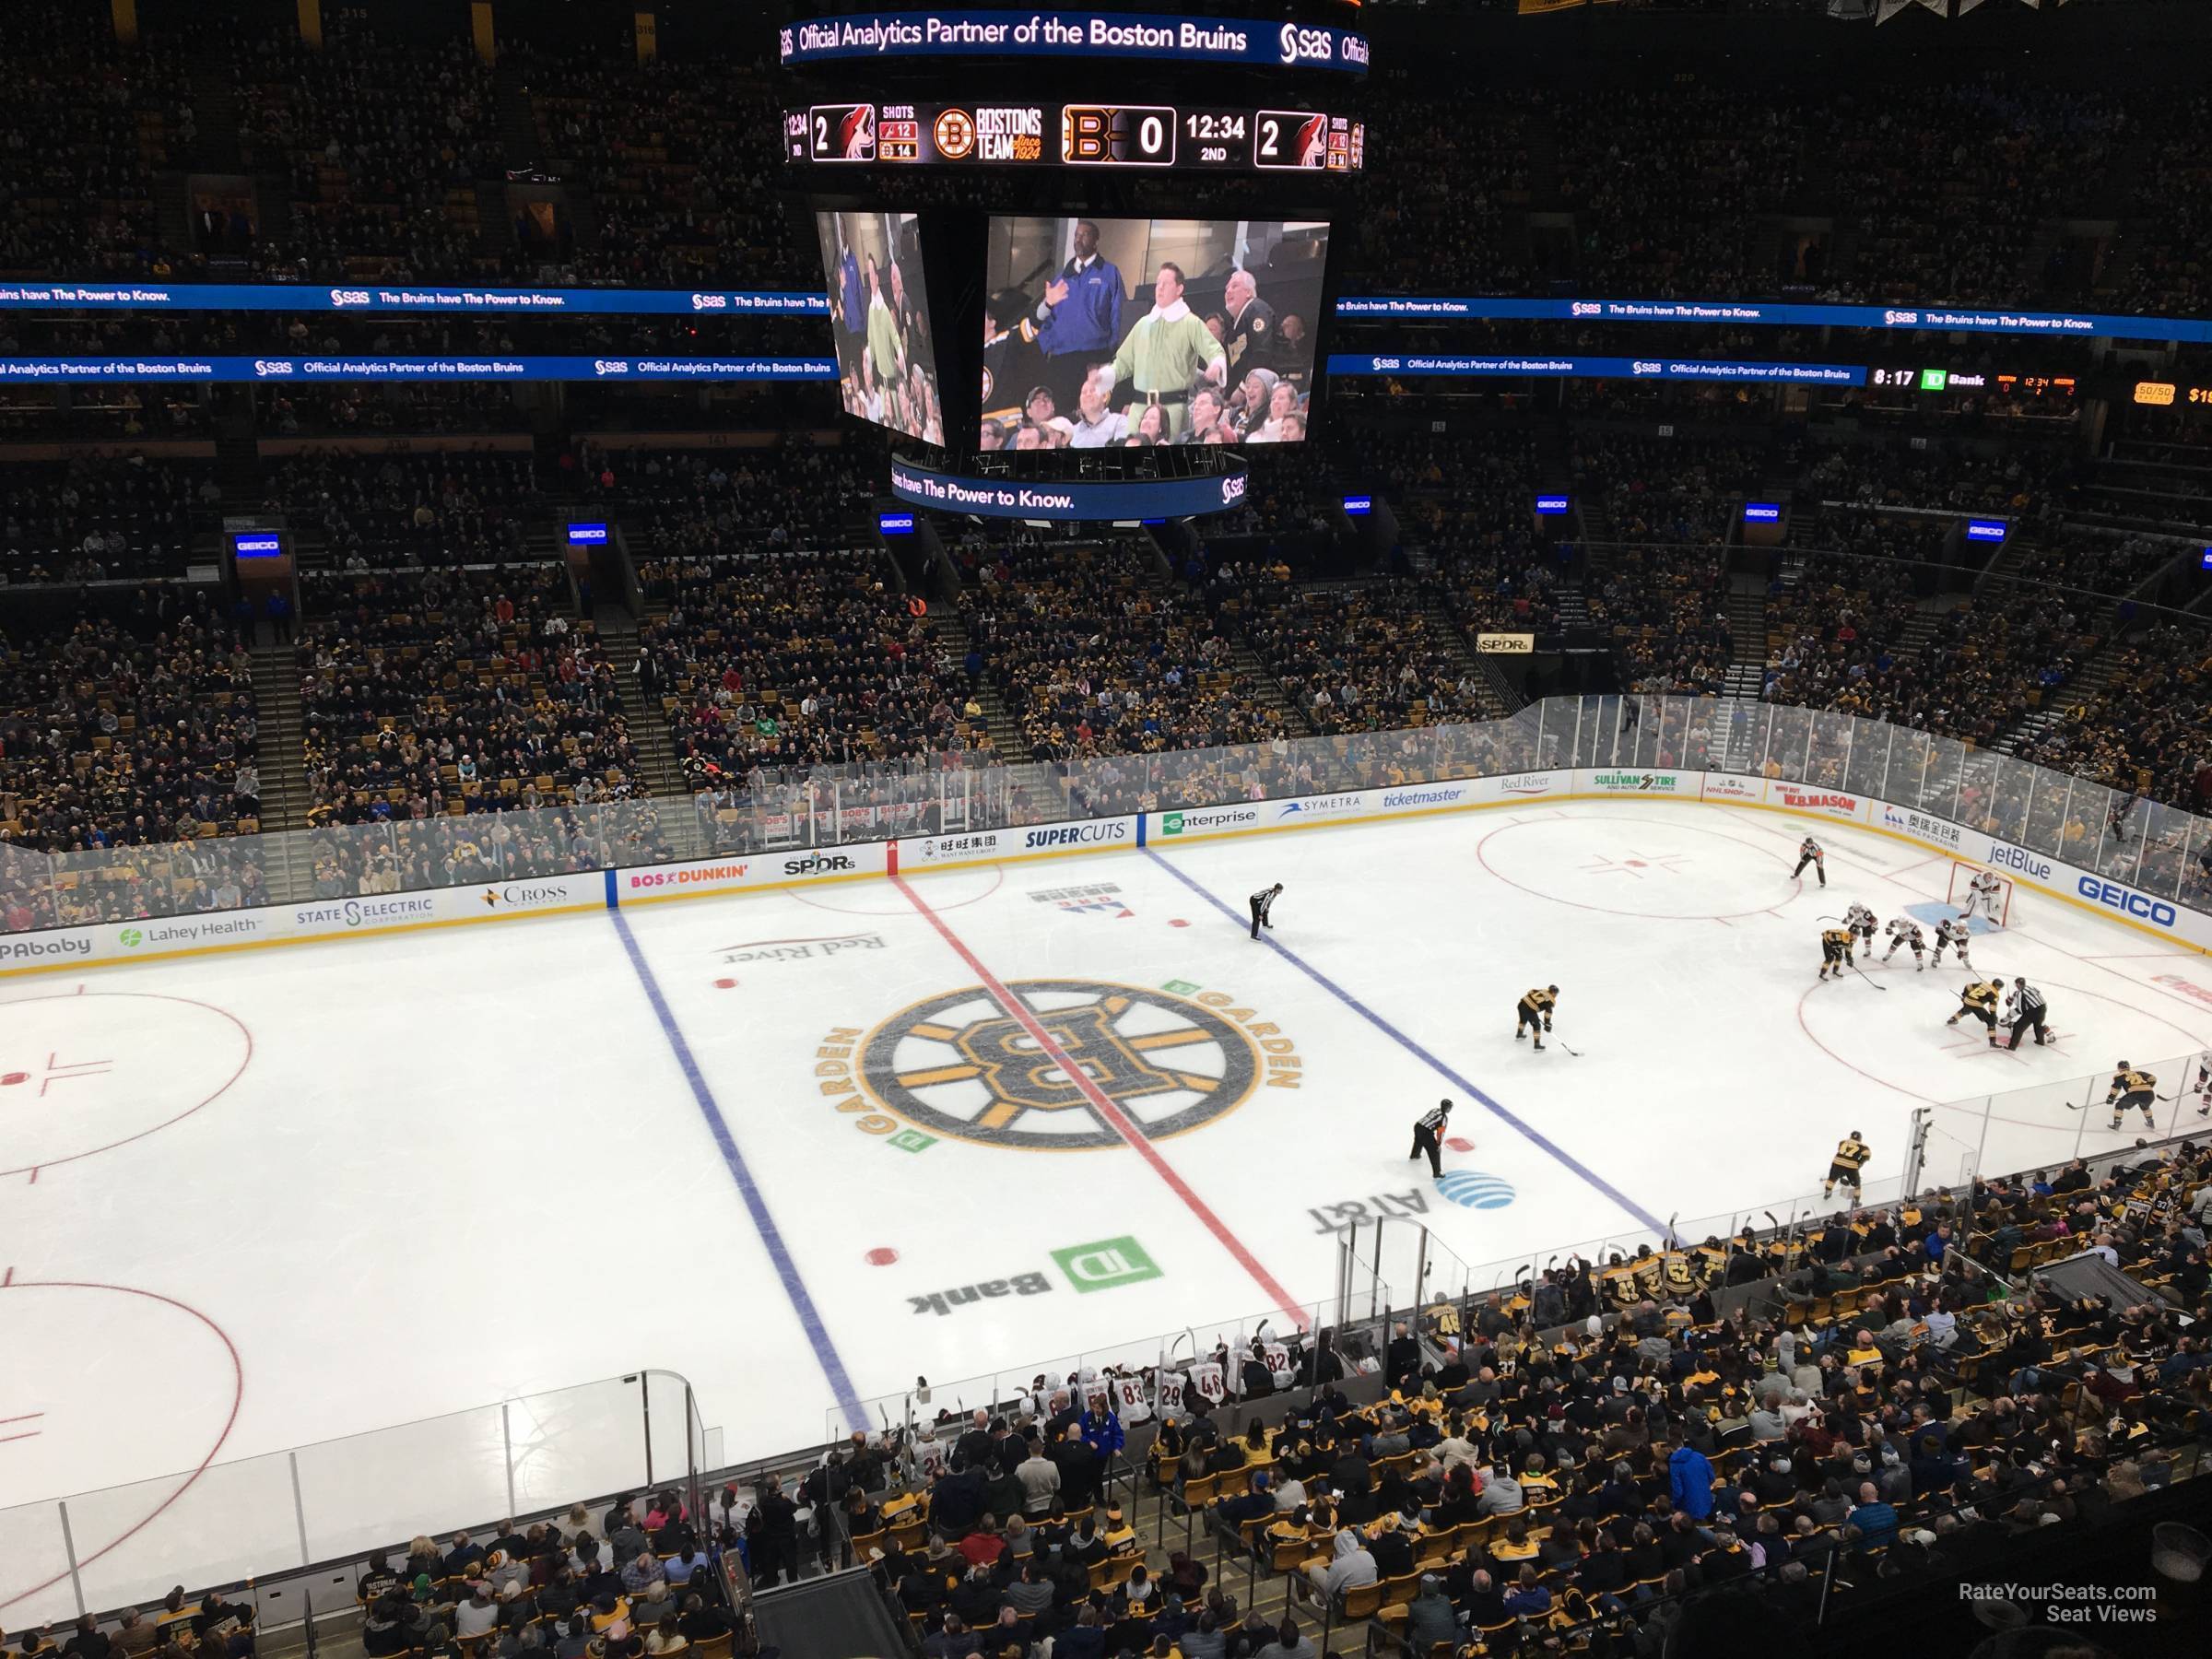 section 302, row 3 seat view  for hockey - td garden